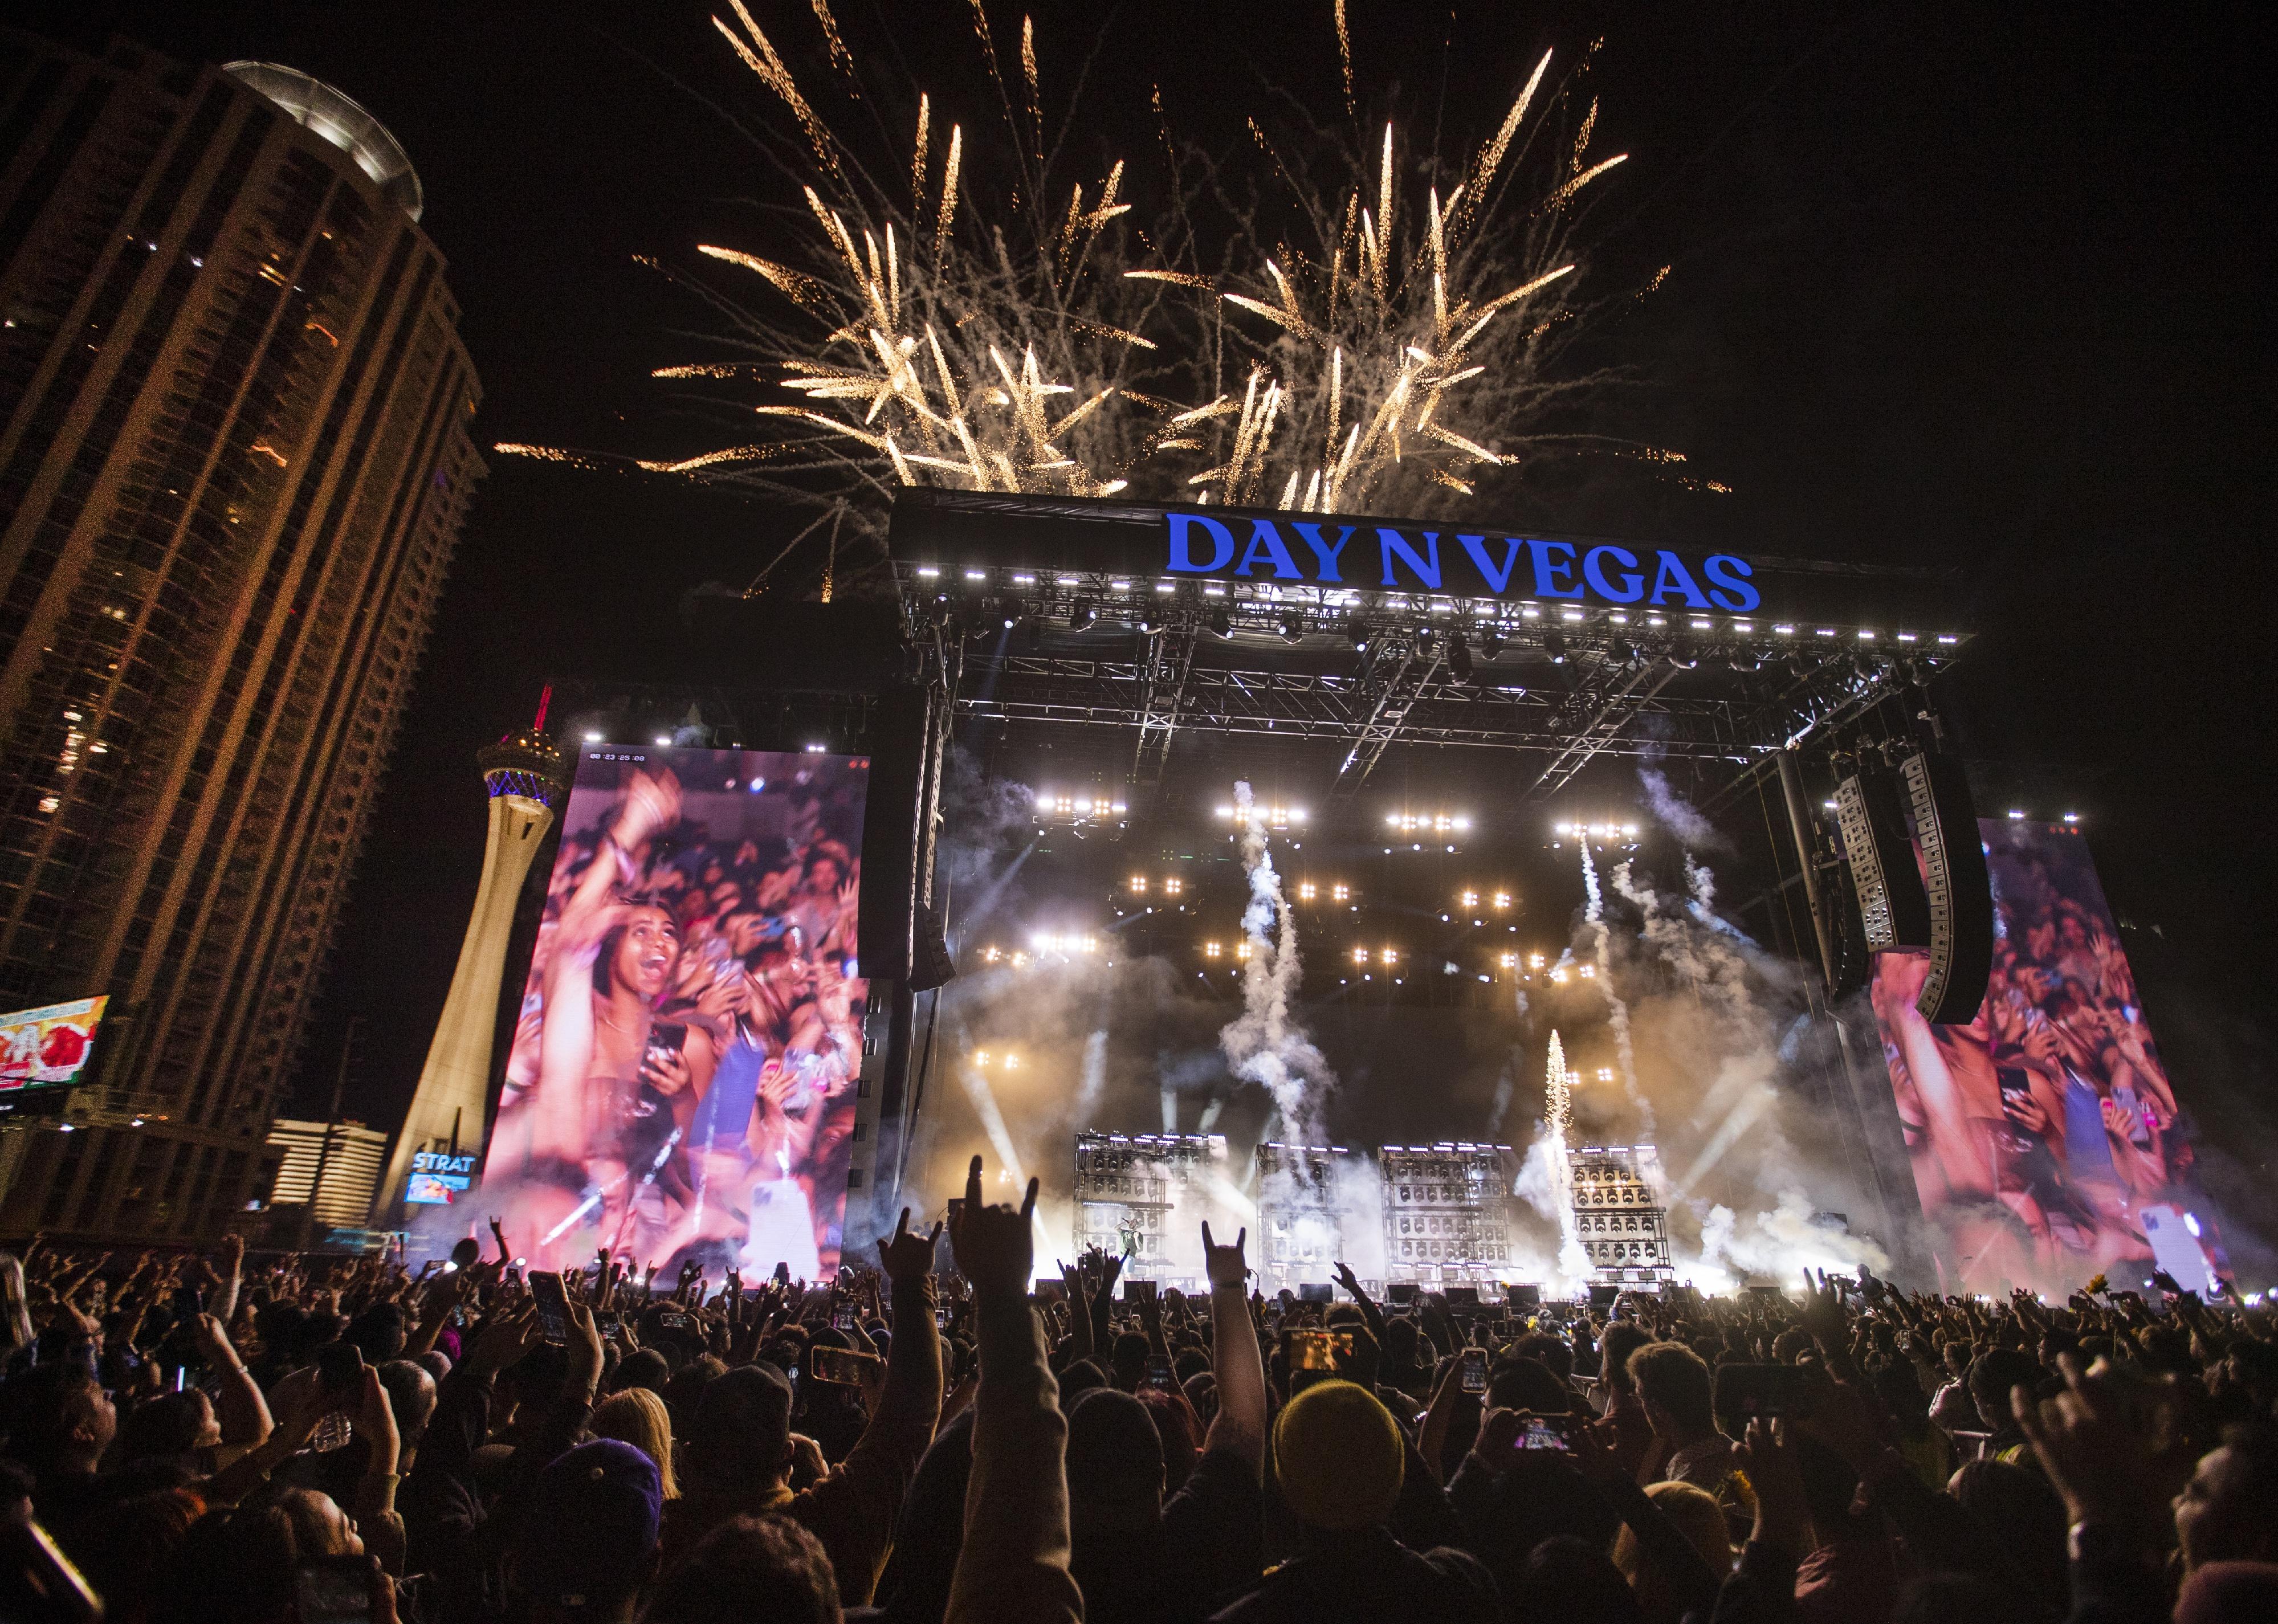 <p>First launched in 2019, this hip-hop music festival took place over the course of three days at the northern end of the Las Vegas strip. In 2021, the respective headliners were Kendrick Lamar, Tyler, the Creator, and Travis Scott. Two months later, Travis Scott's separate Astroworld Festival <a href="https://www.cbc.ca/news/entertainment/travis-scott-concert-deaths-compression-asphyxia-1.6288786">led to the tragic death of 10 attendees</a>.</p>